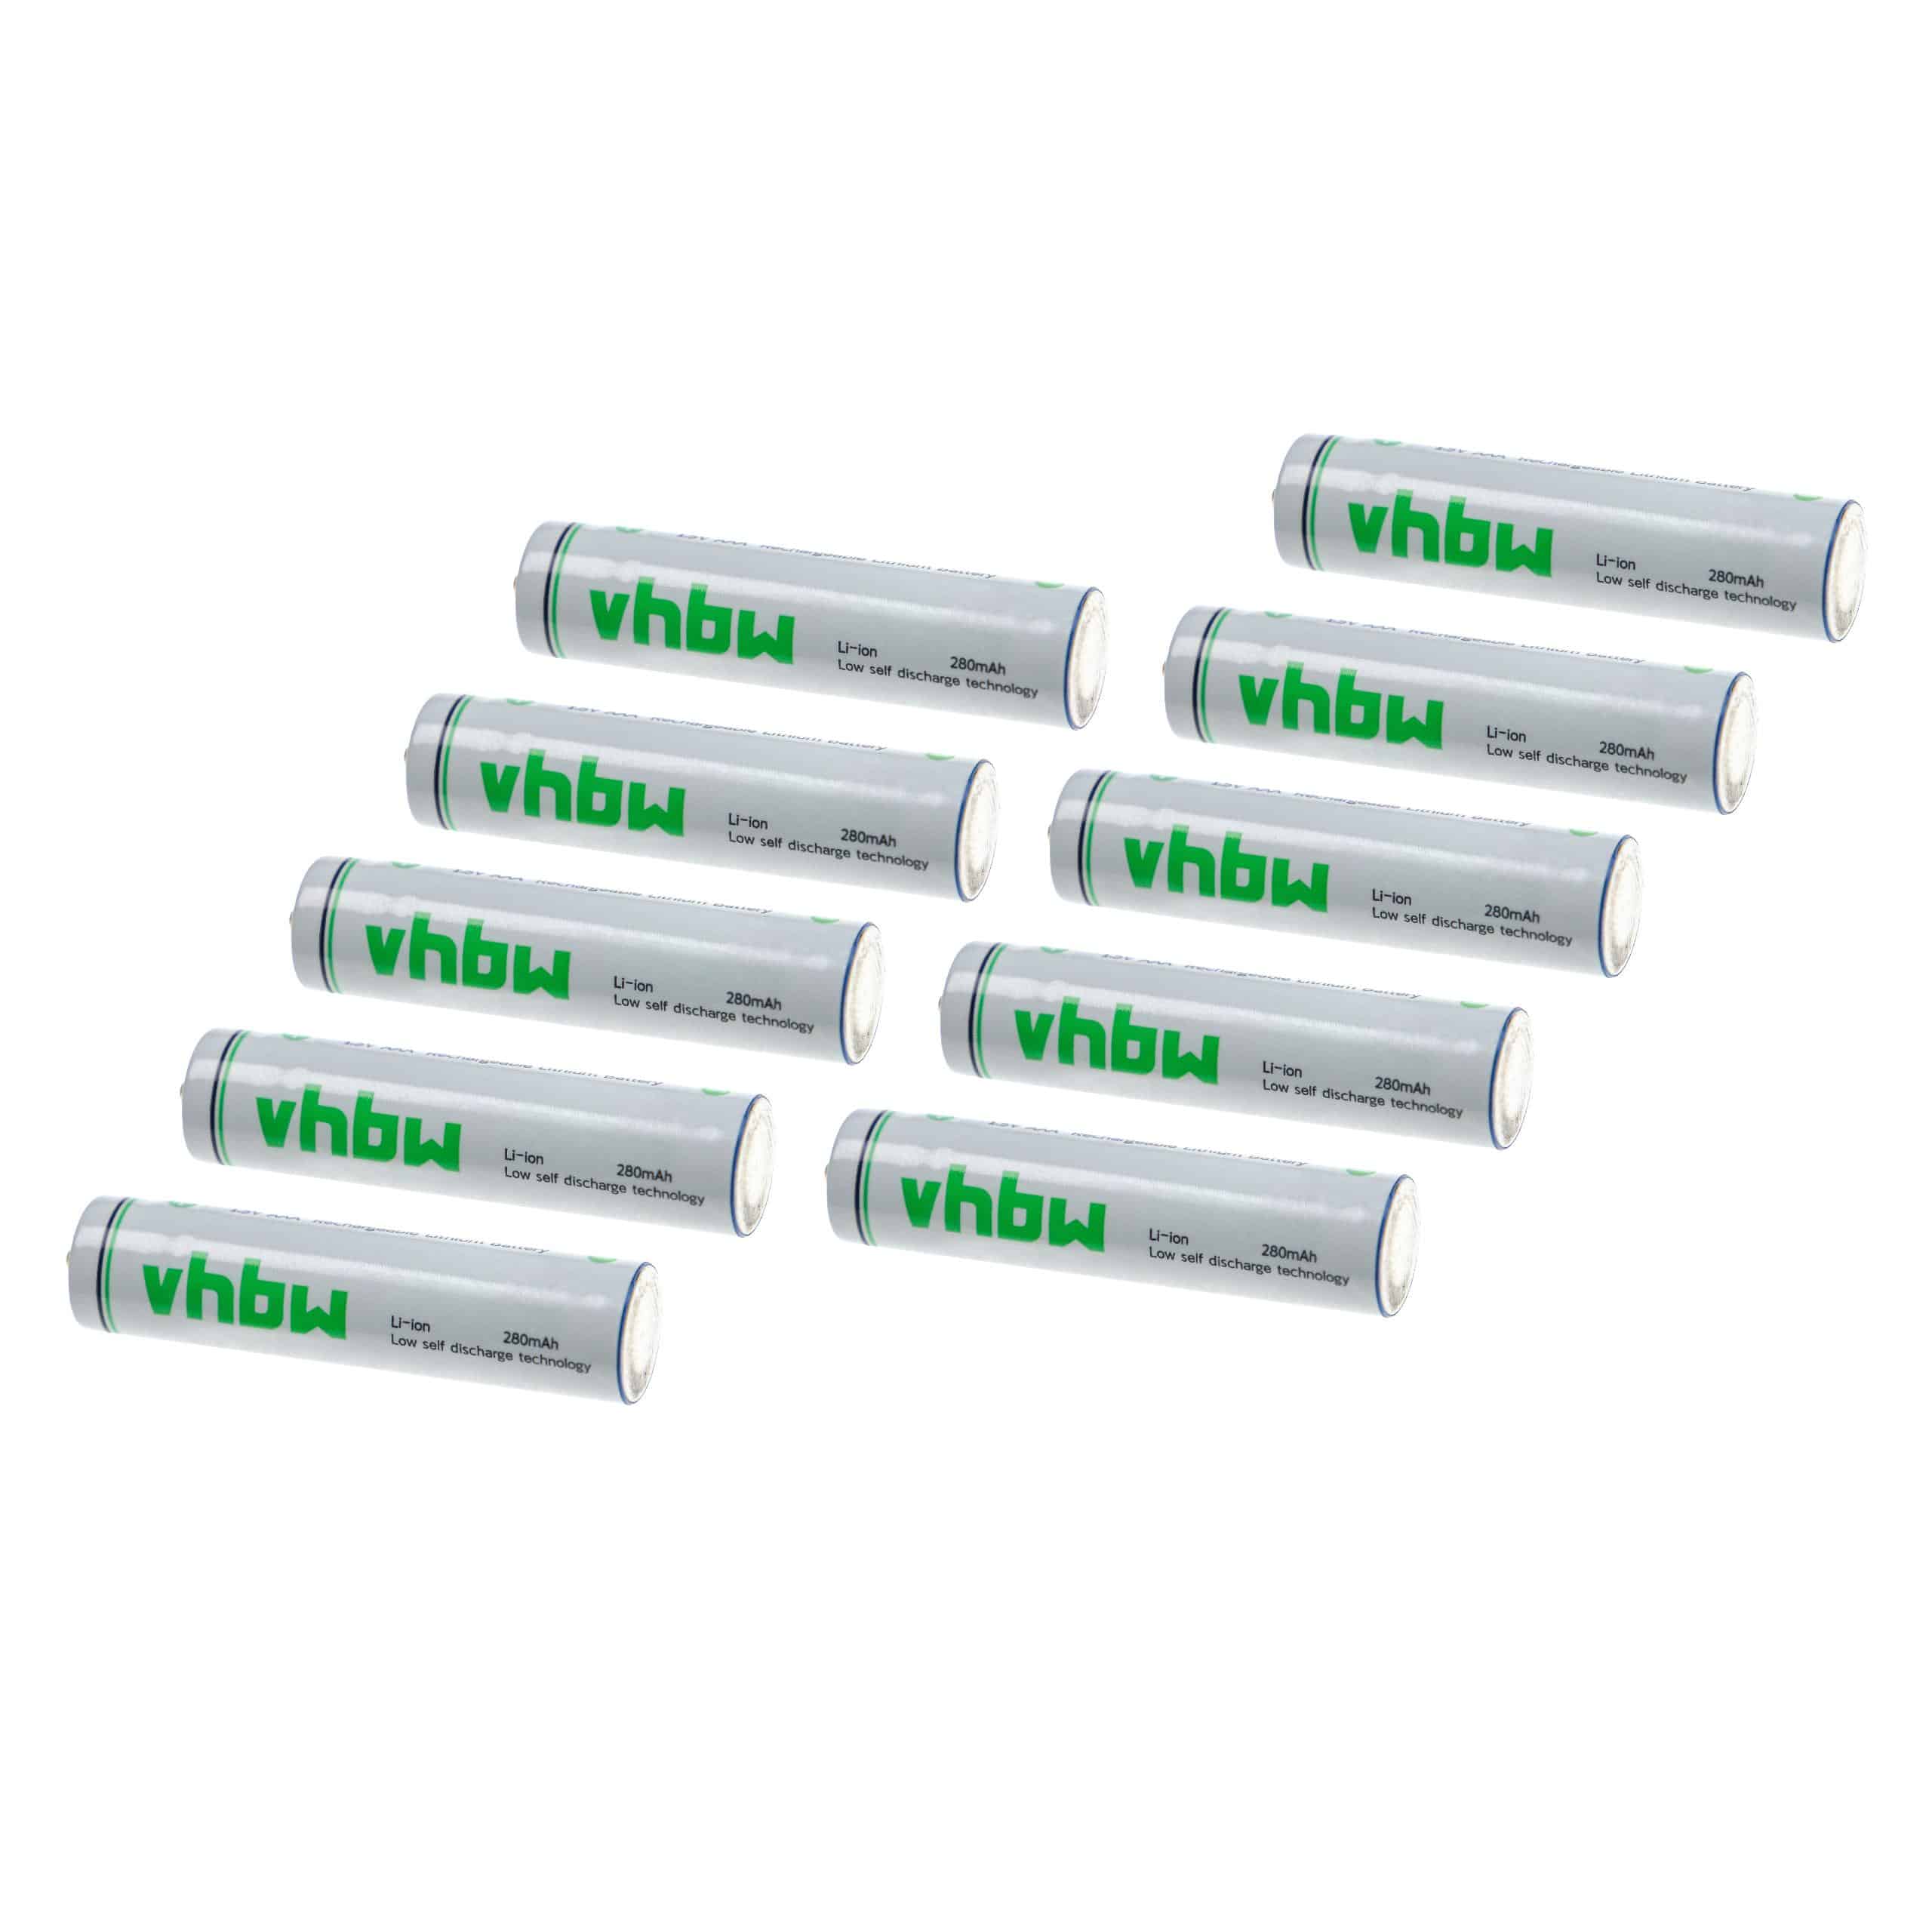 AAA Micro Replacement Battery (10 Units) for Use in Various Devices - 280 mAh 1.5 V Li-Ion